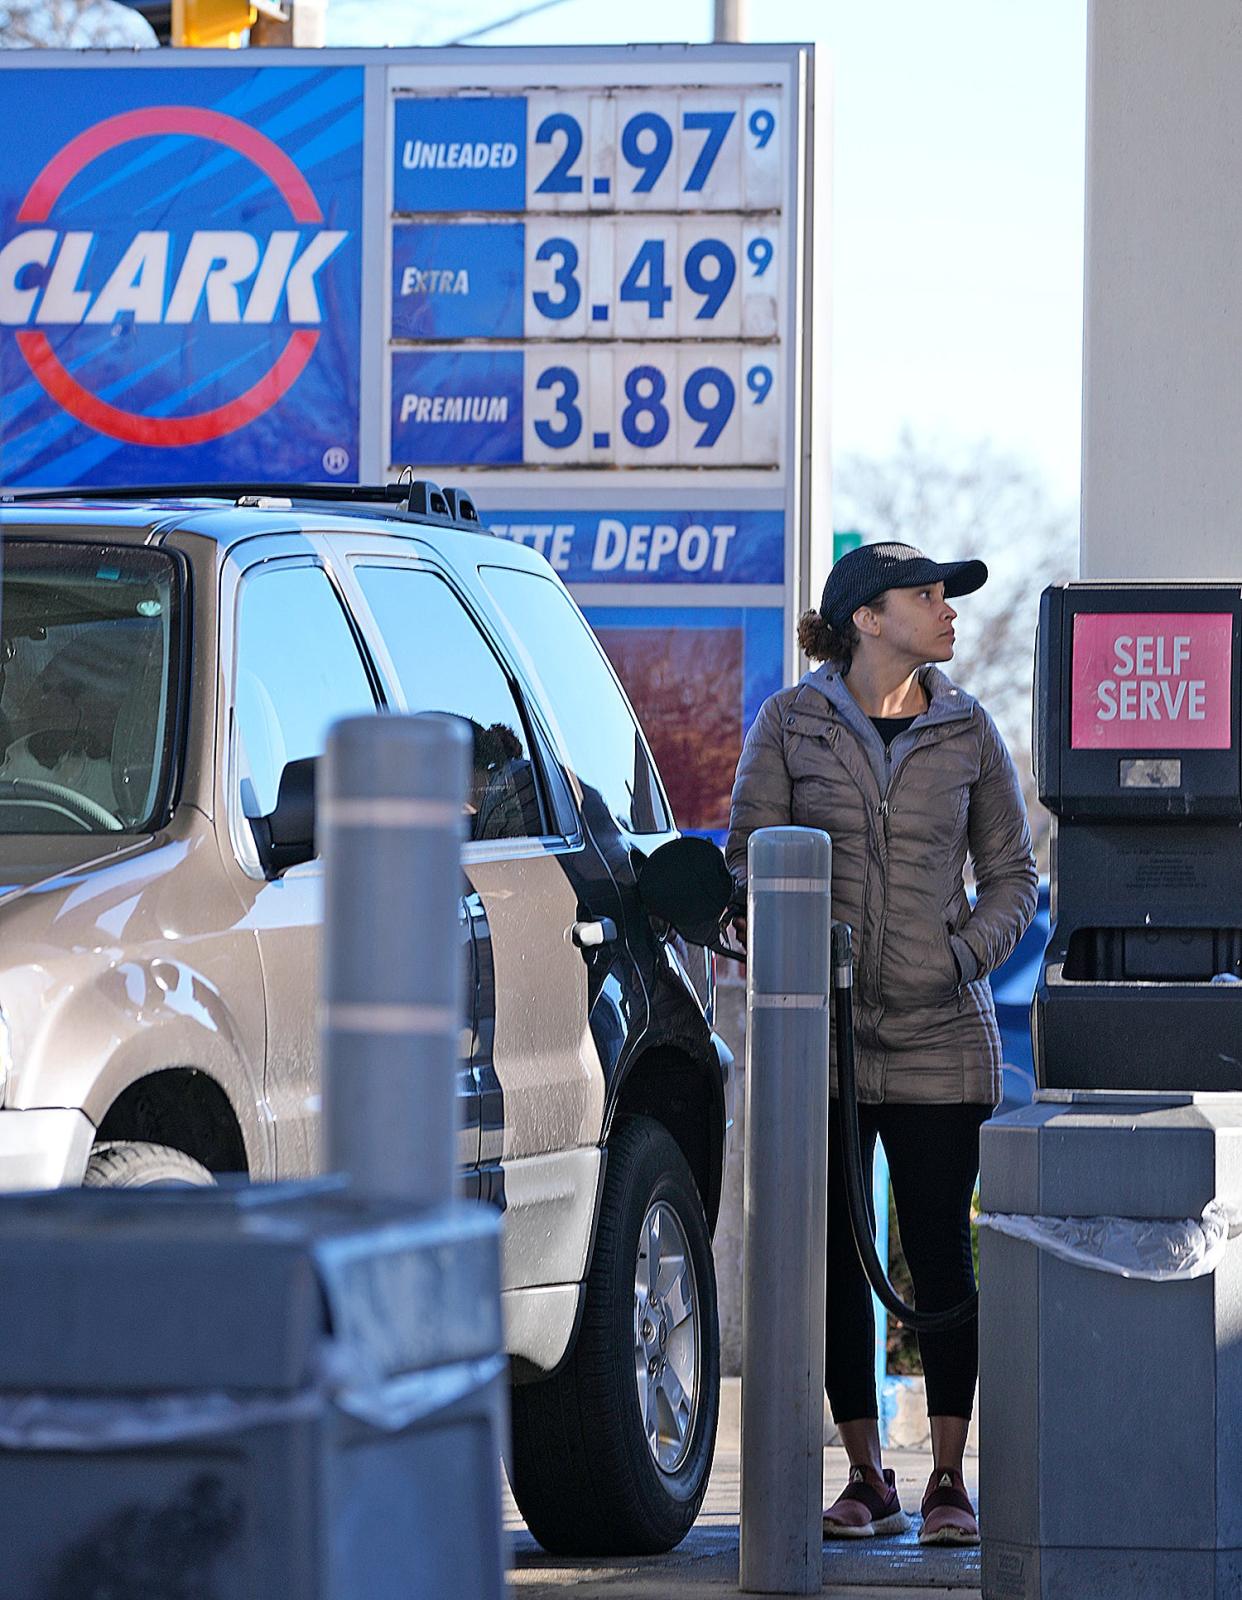 Shanon Kuhagen, of Milwaukee fills up for for $2.97 a gallon at the Clark gas station on West Oklahoma Avenue at South 16th Street in Milwaukee on Monday, Nov. 28, 2022.